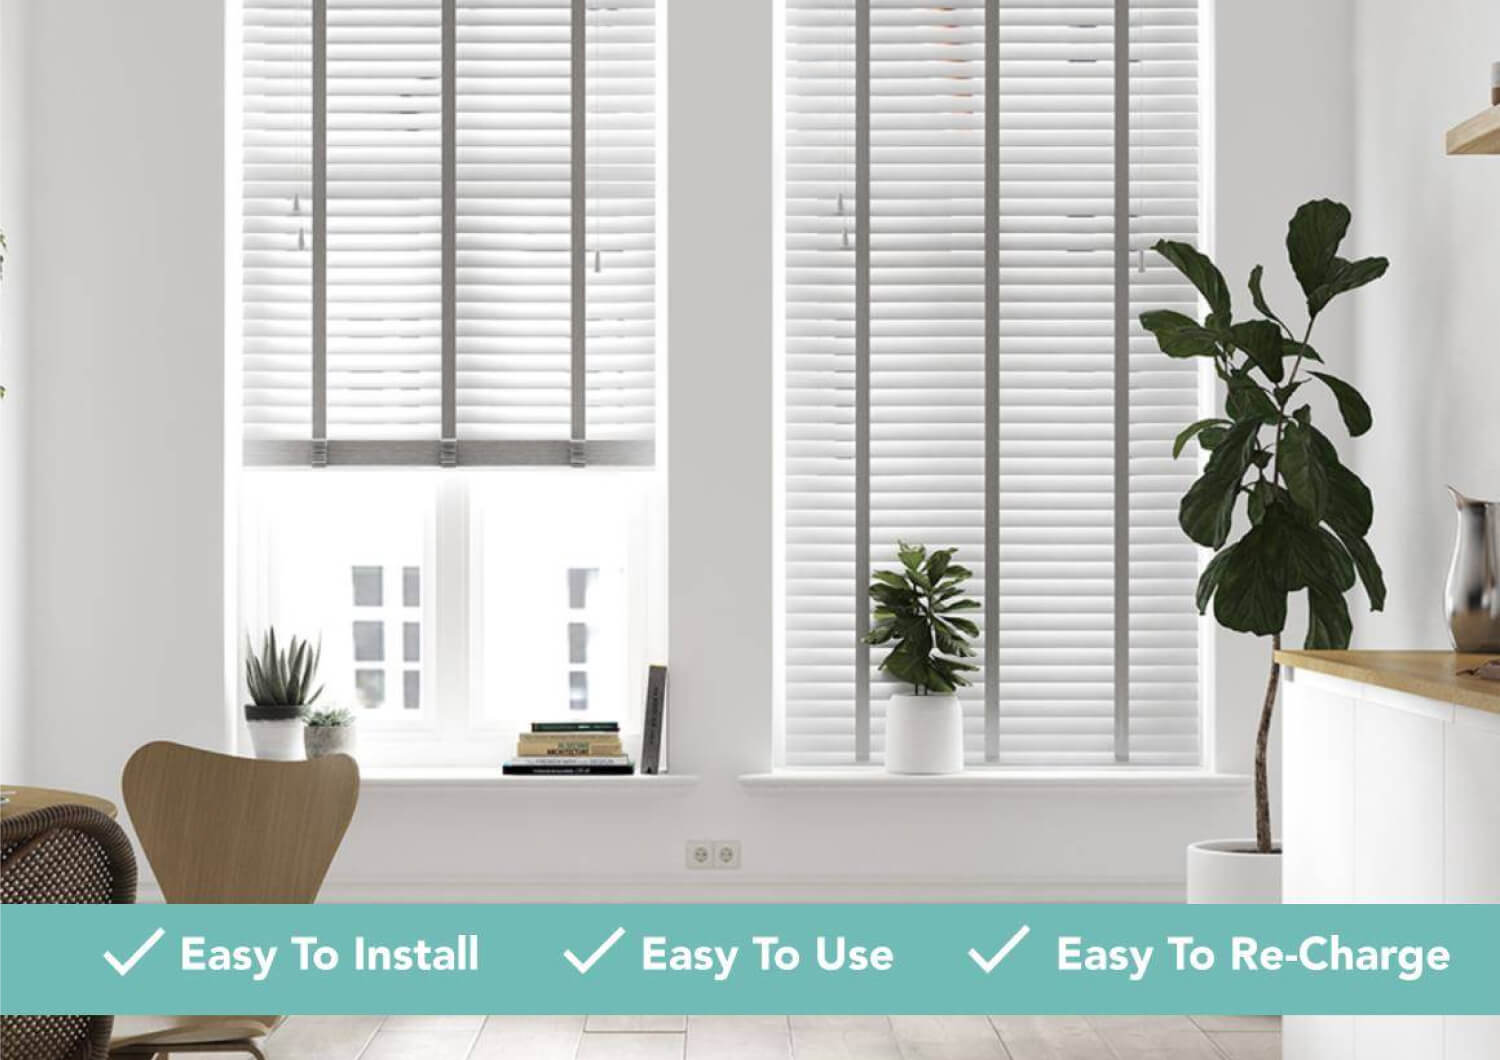 Why Buy Smart Blinds?